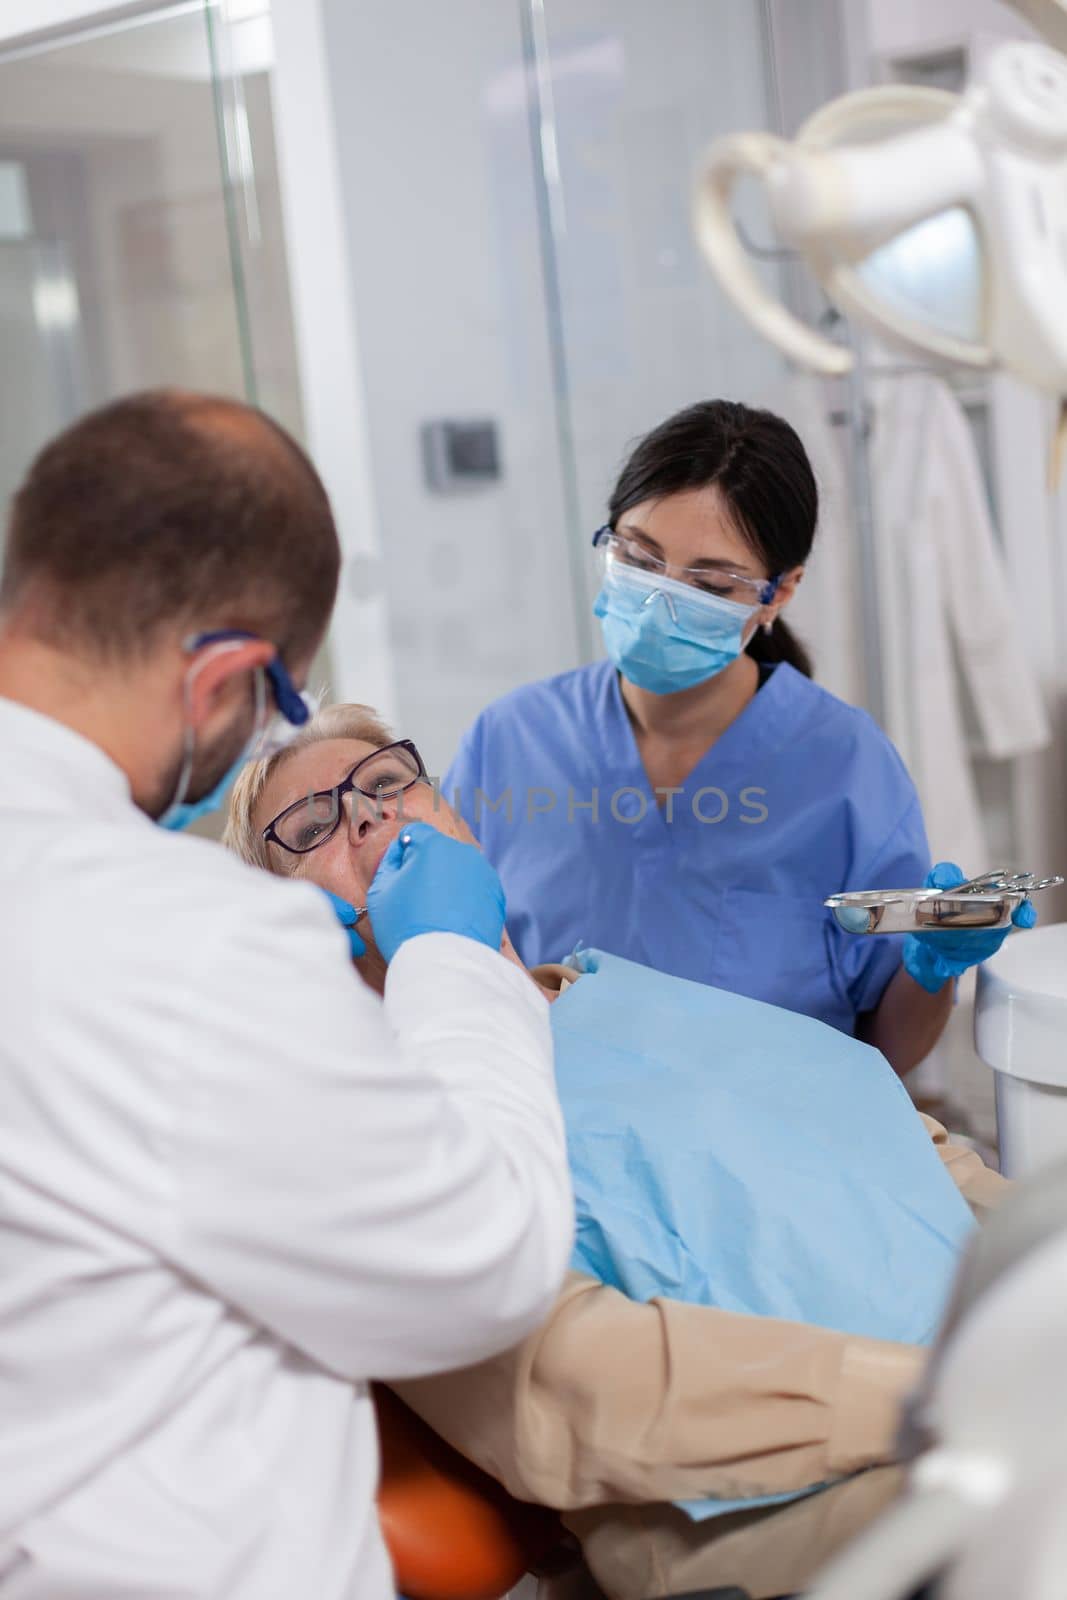 Dentist with assistant install implant in patient mouthin modern clinic. Elderly woman during medical examination with stomatolog in dental office with orange equipment.